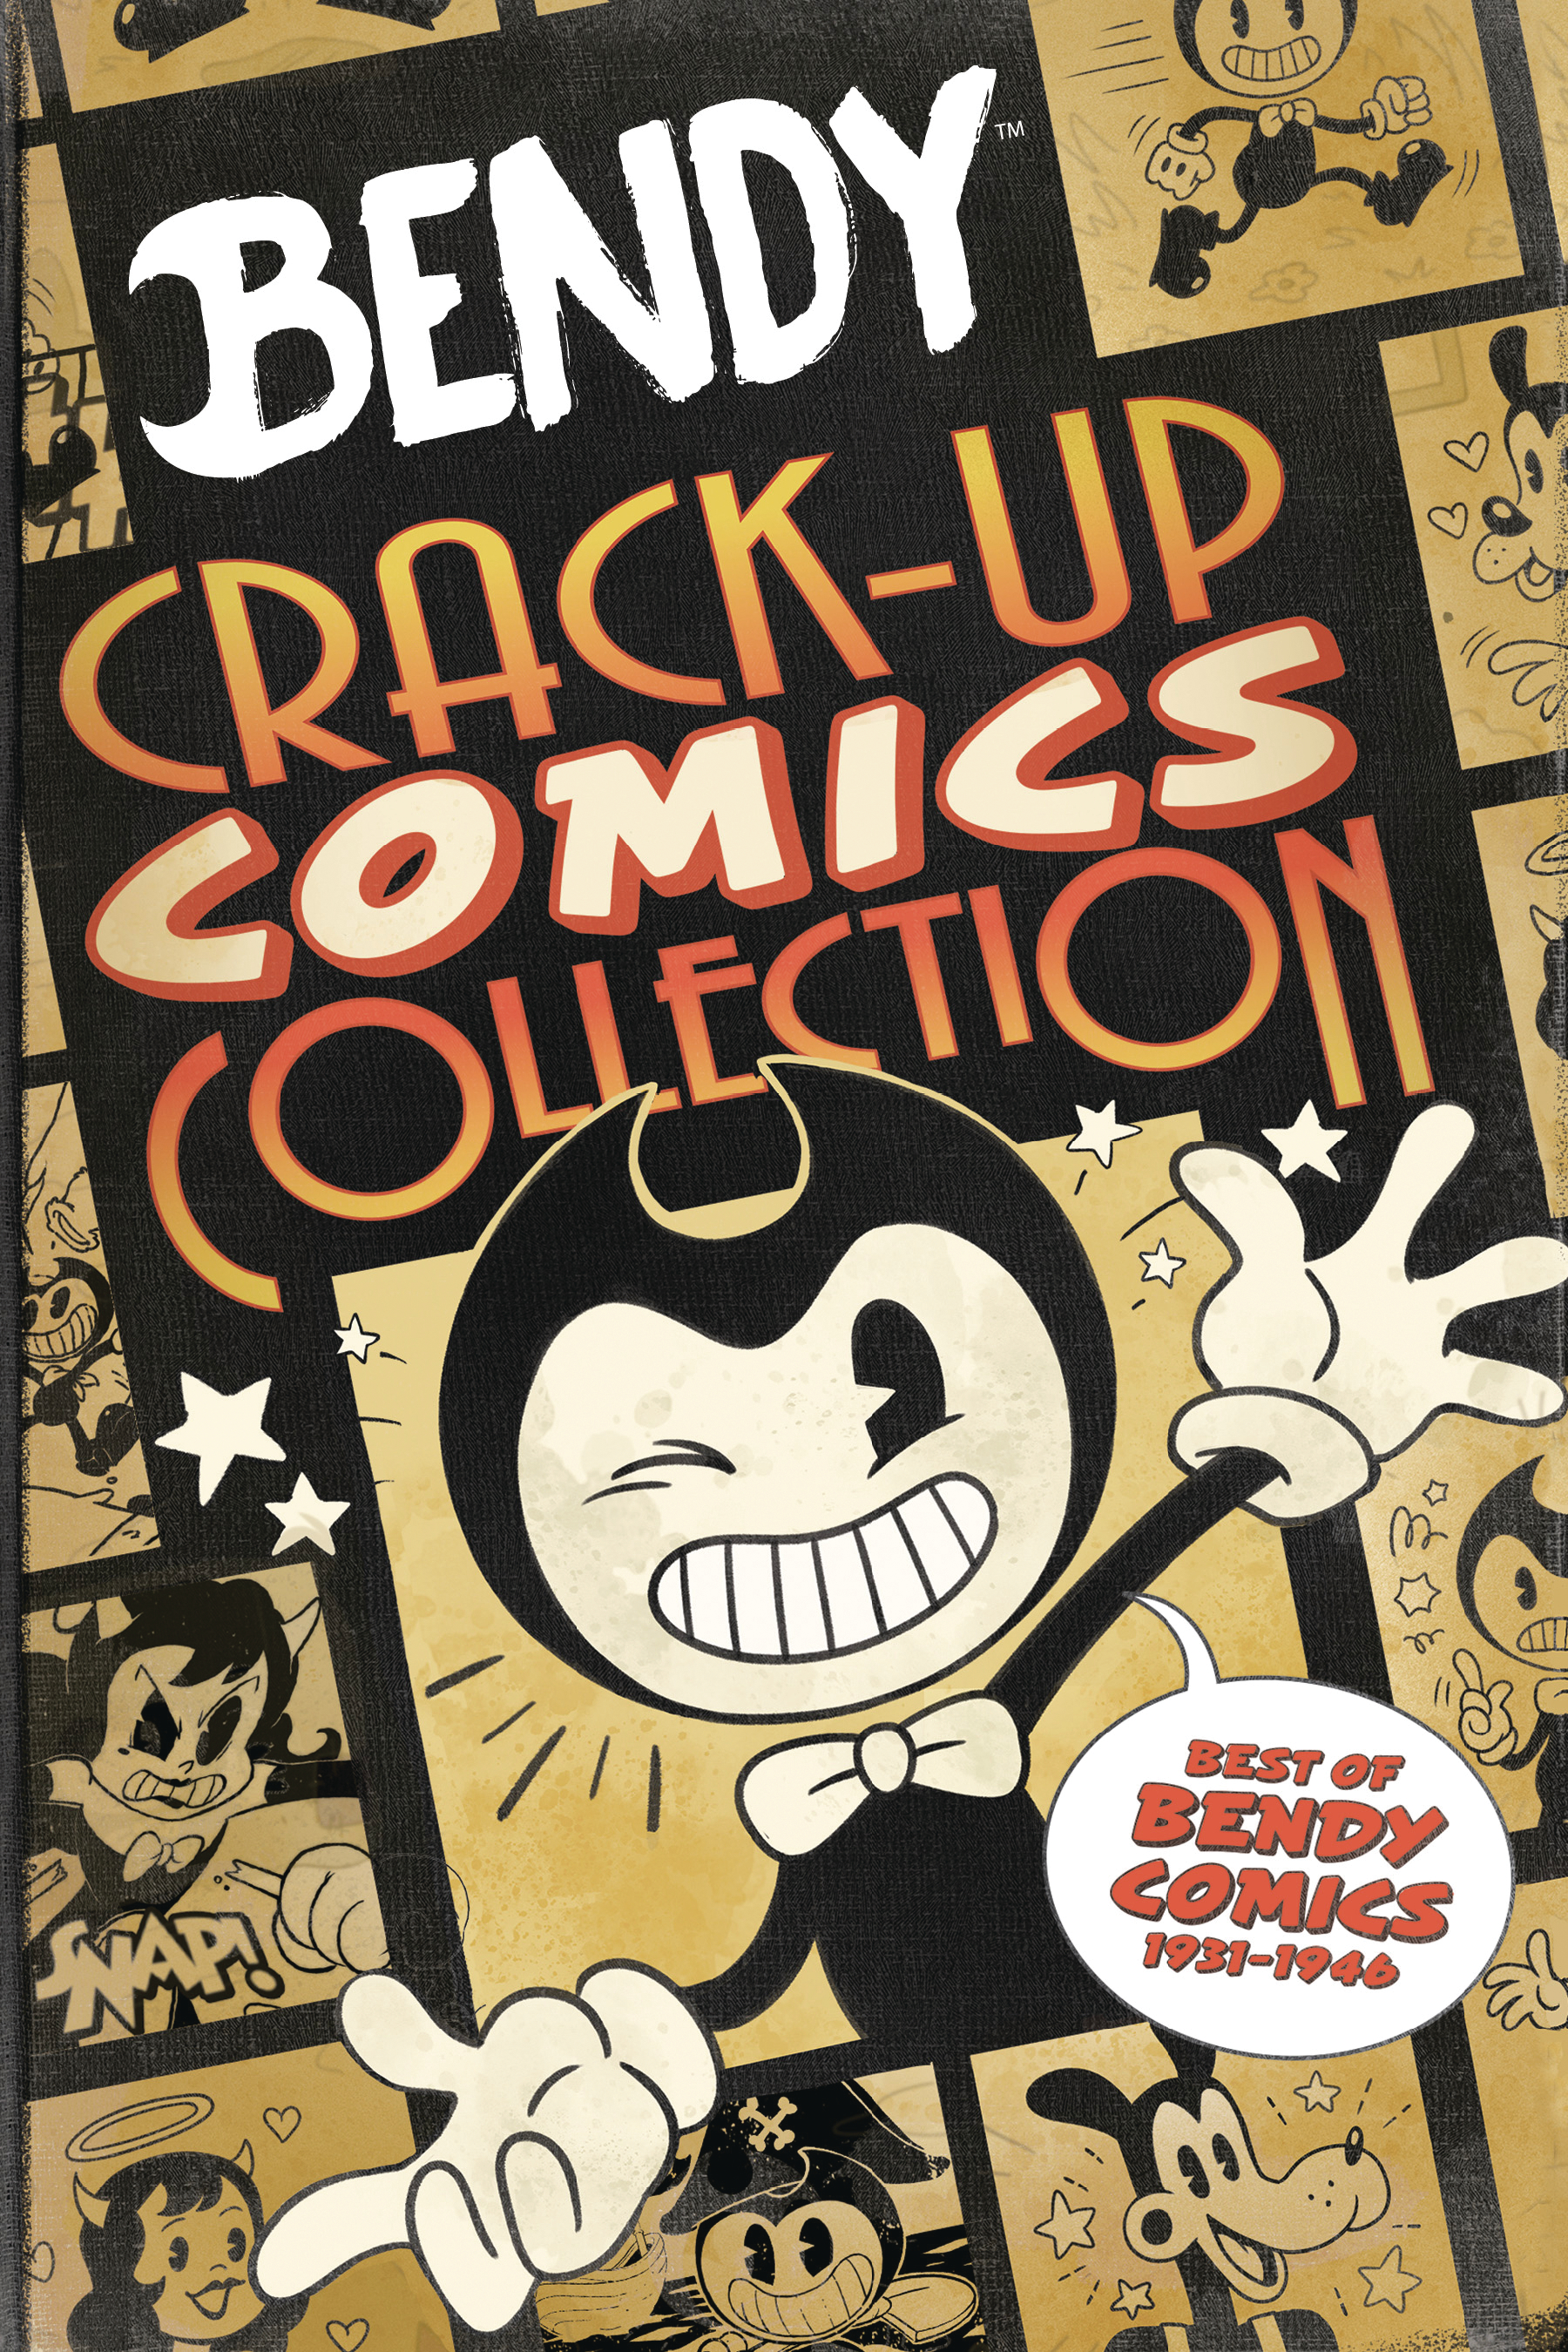 Bendy Crack Up Comics Collected Soft Cover